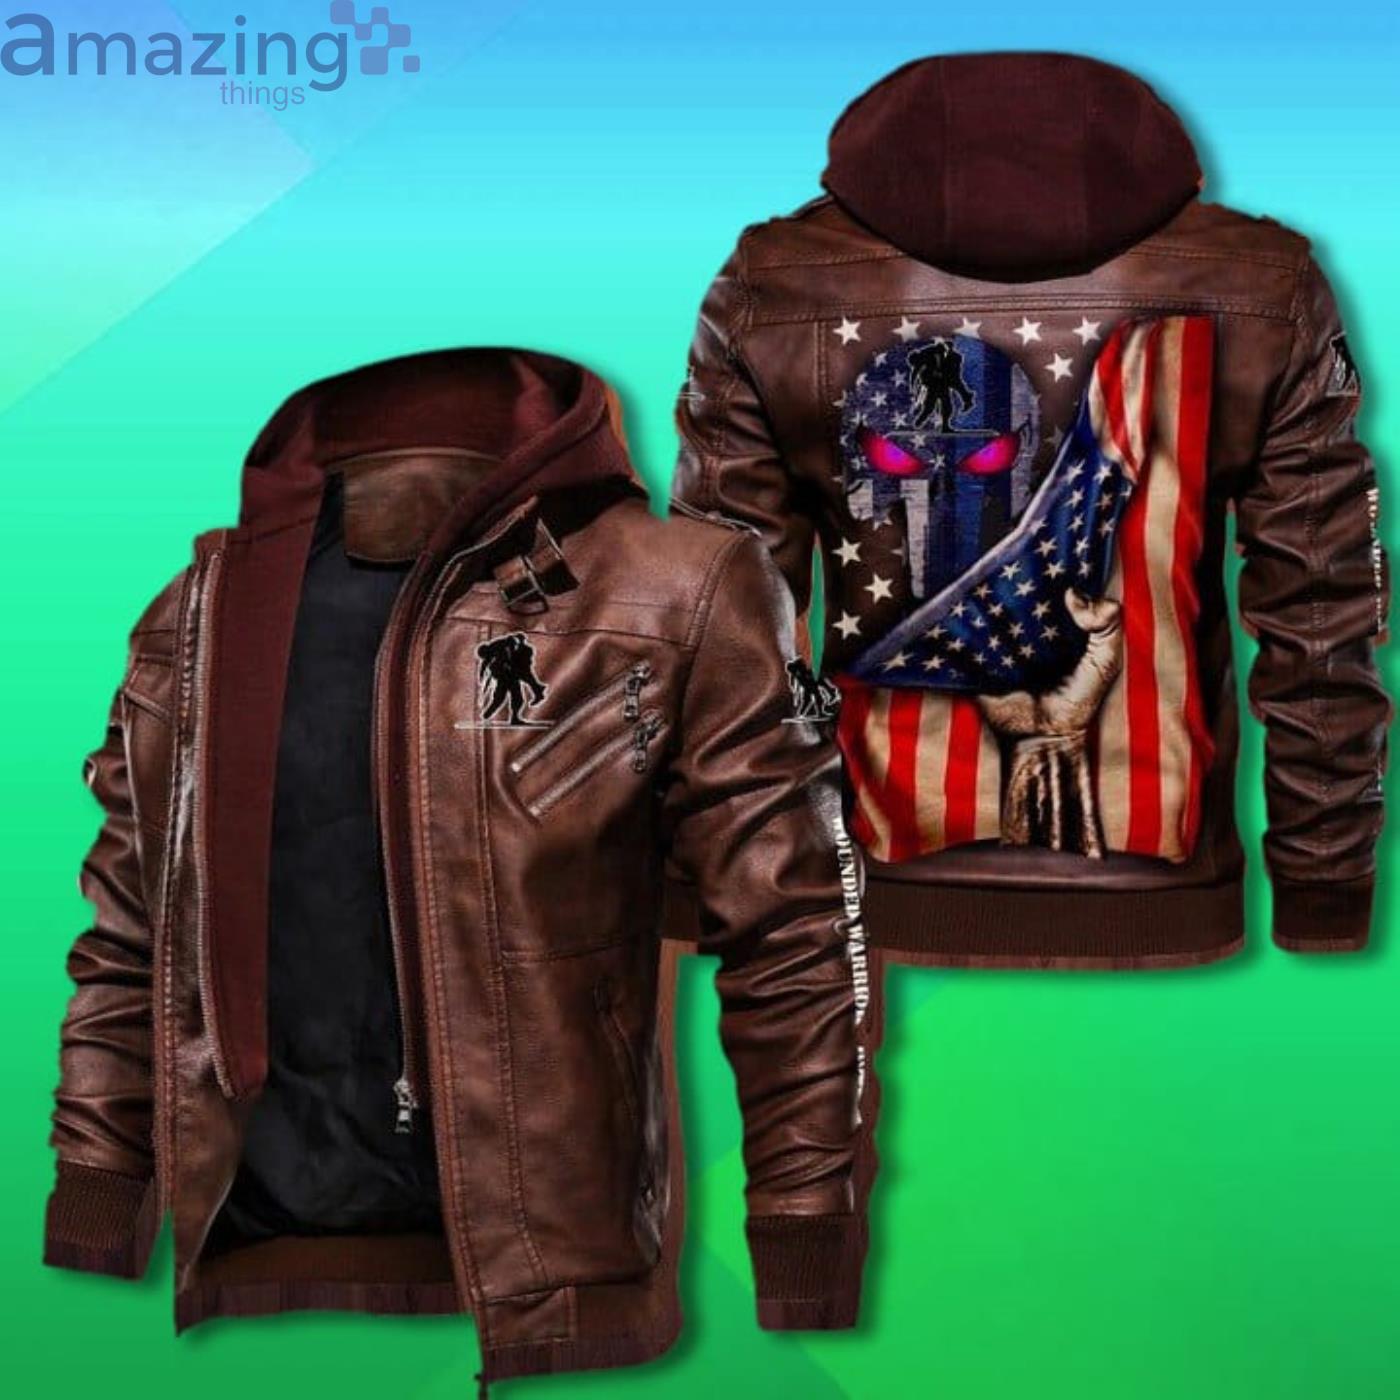 Wounded Warrior Project Punisher Skull Leather Jacket